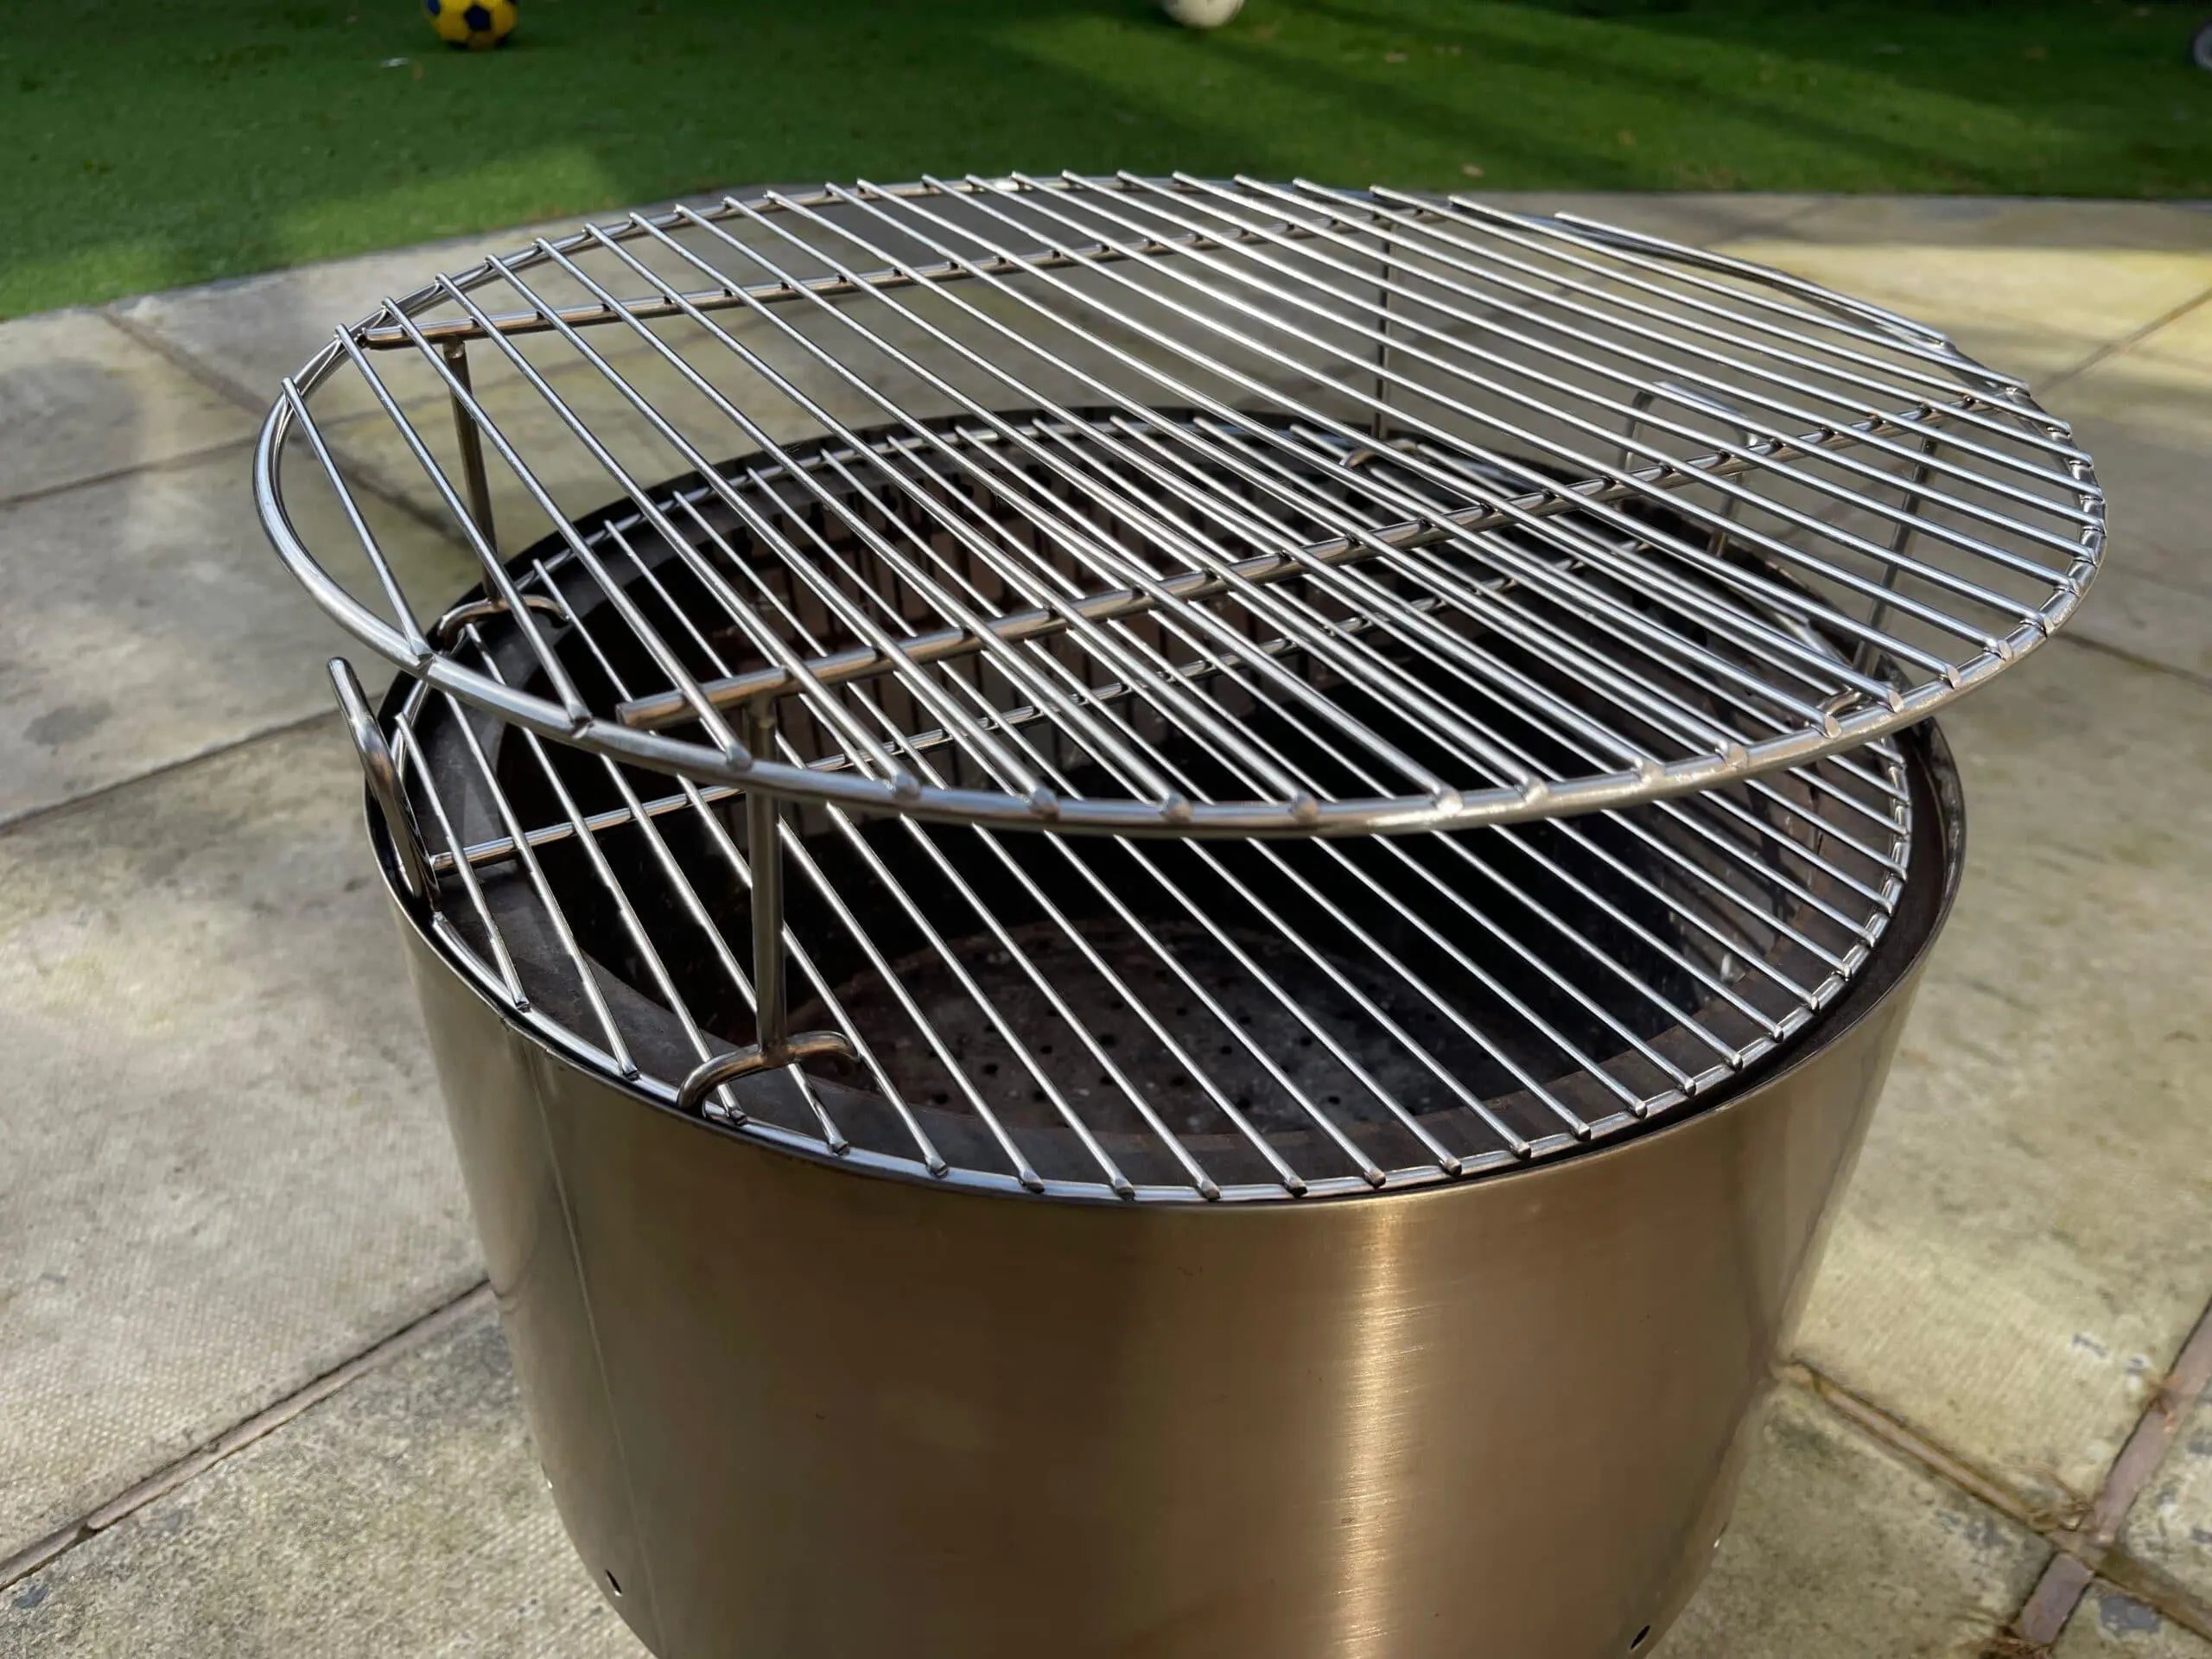 Genie Deluxe BBQ Grill (raised)